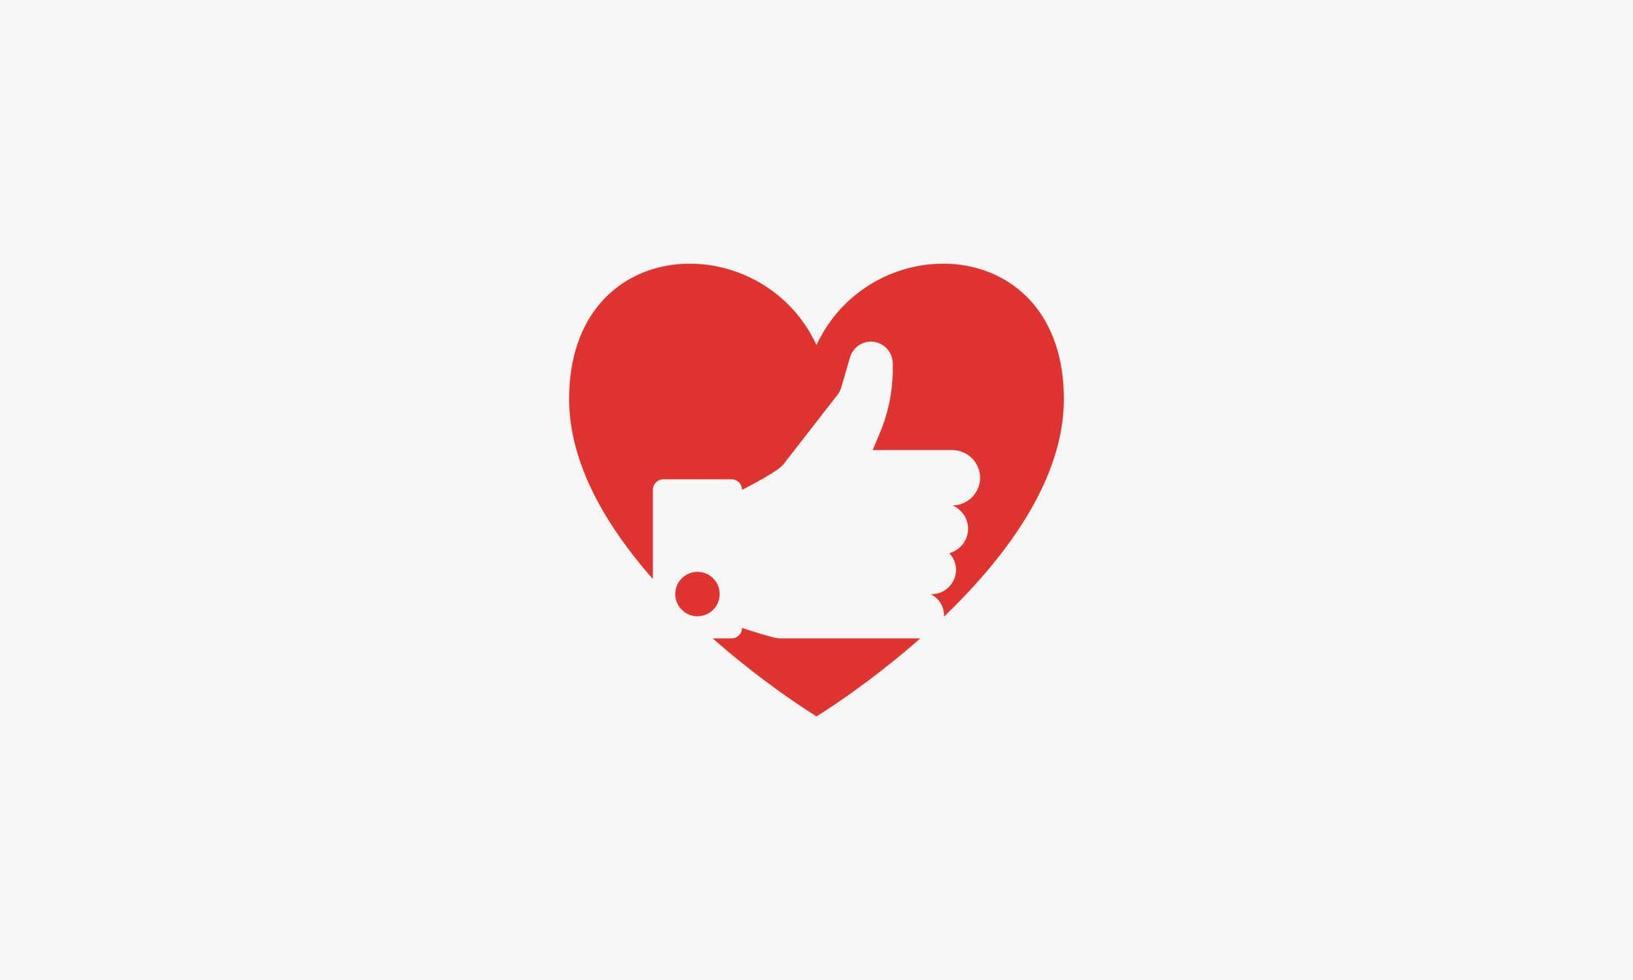 thumbs up in the heart graphic logo design concept. vector